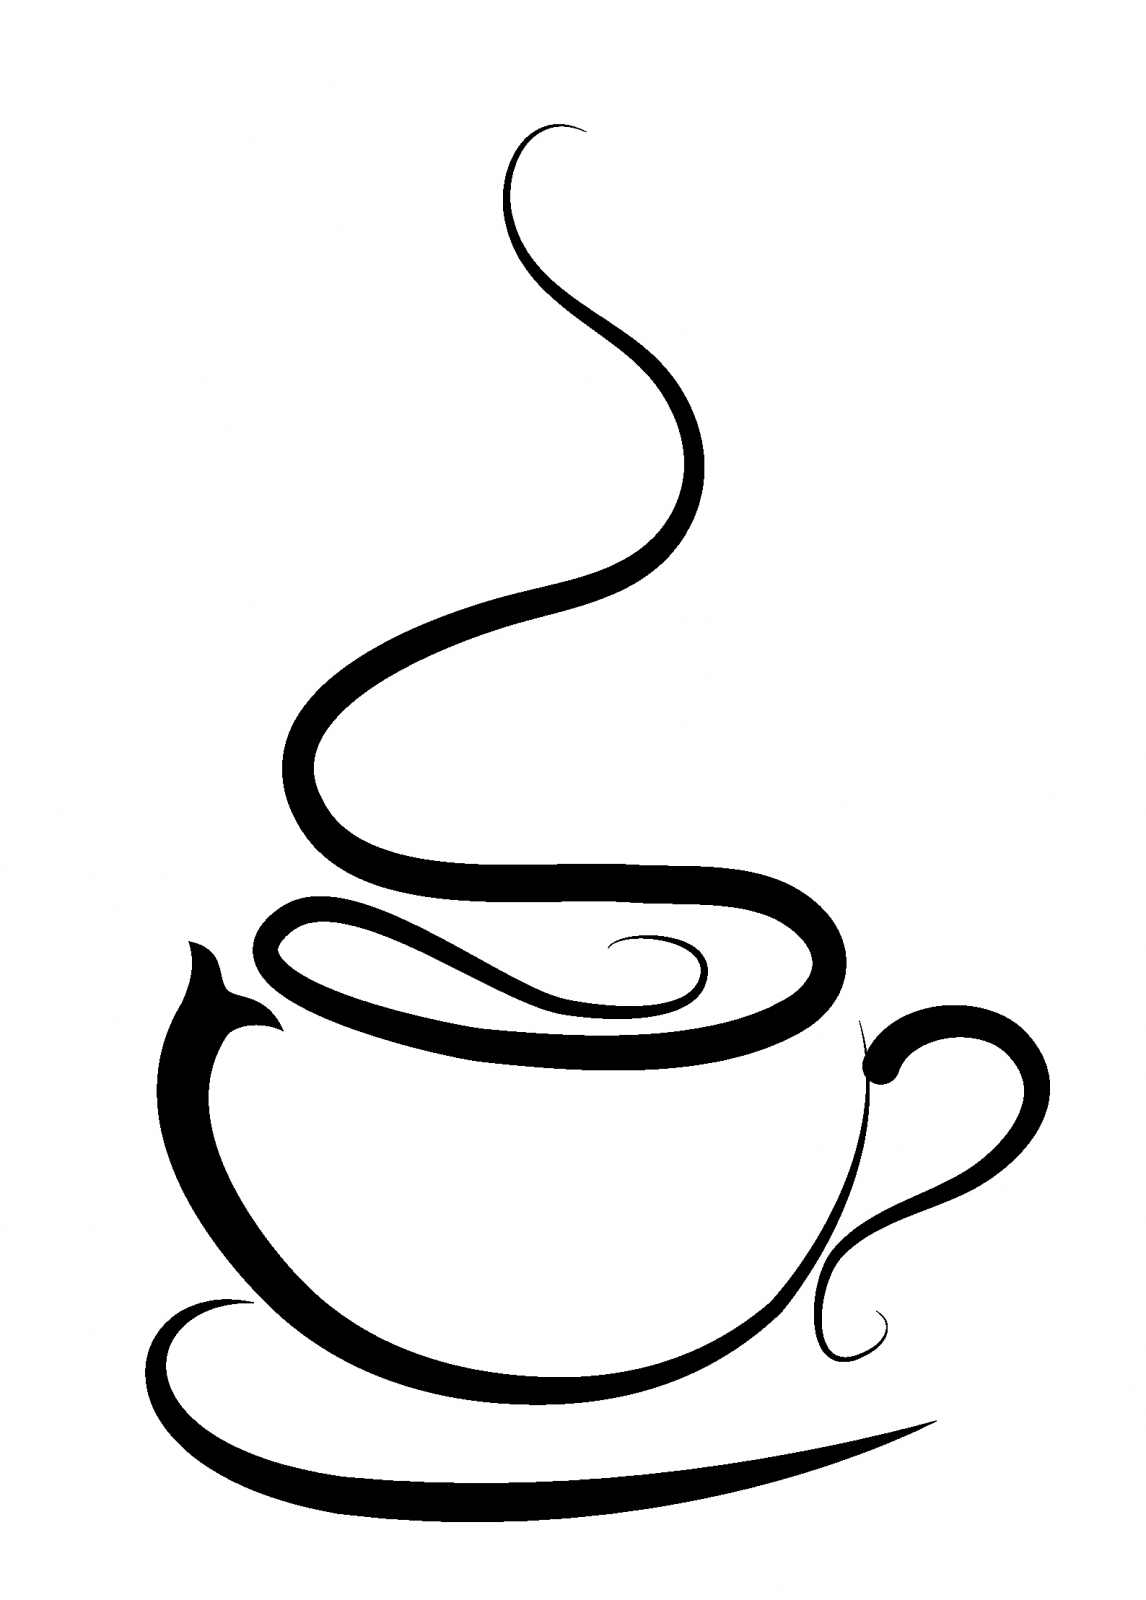 Featured image of post Coffee Mug Silhouette Vector Free Sample as well as the premium download of this coffee mug silhouette vector